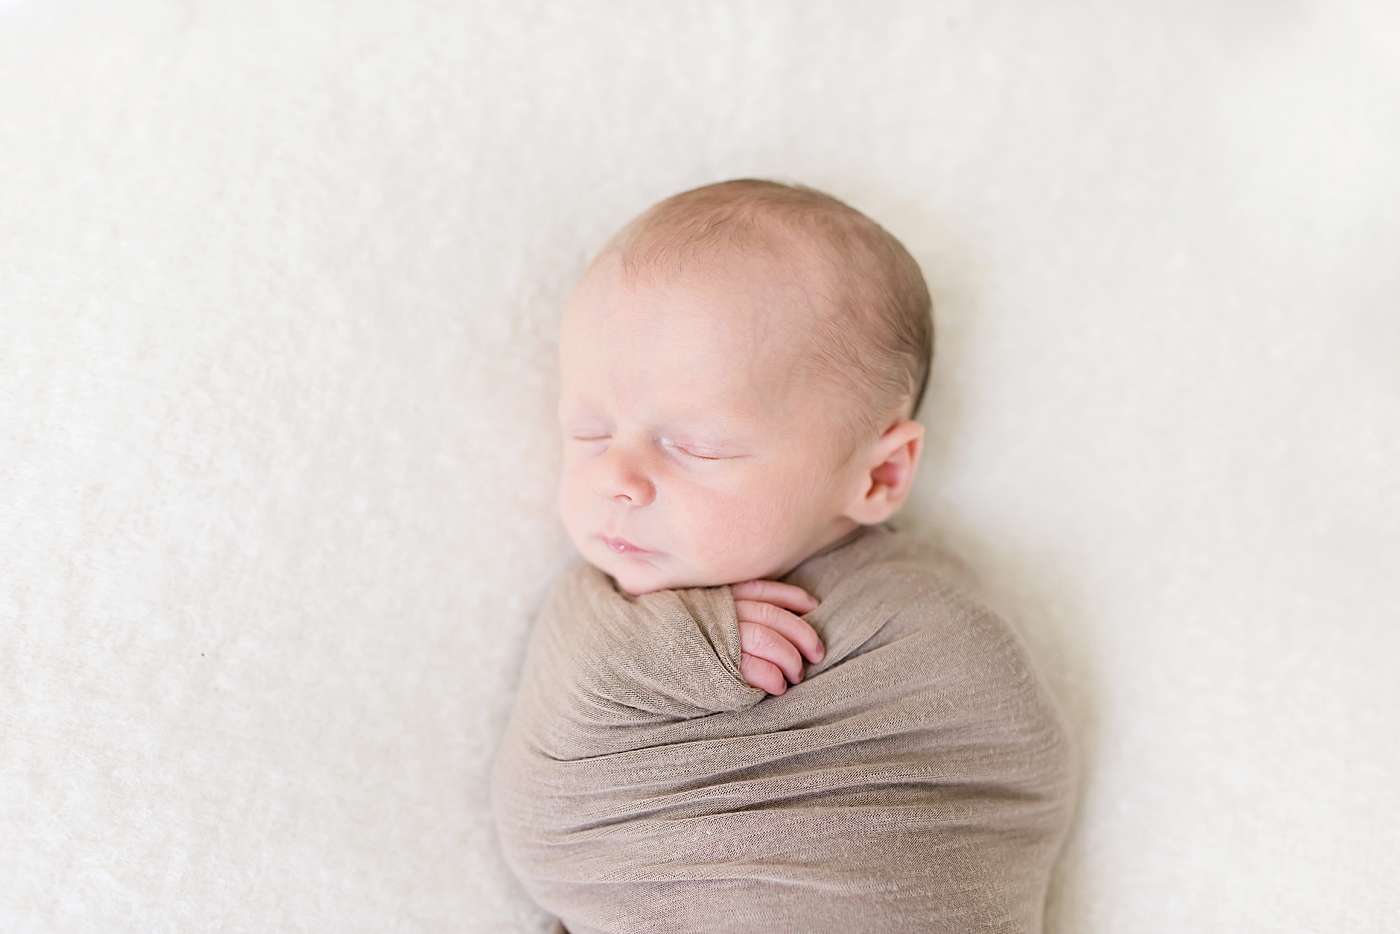 Baby boy sleeping wrapped in brown swaddle | Photo by Anna Wisjo